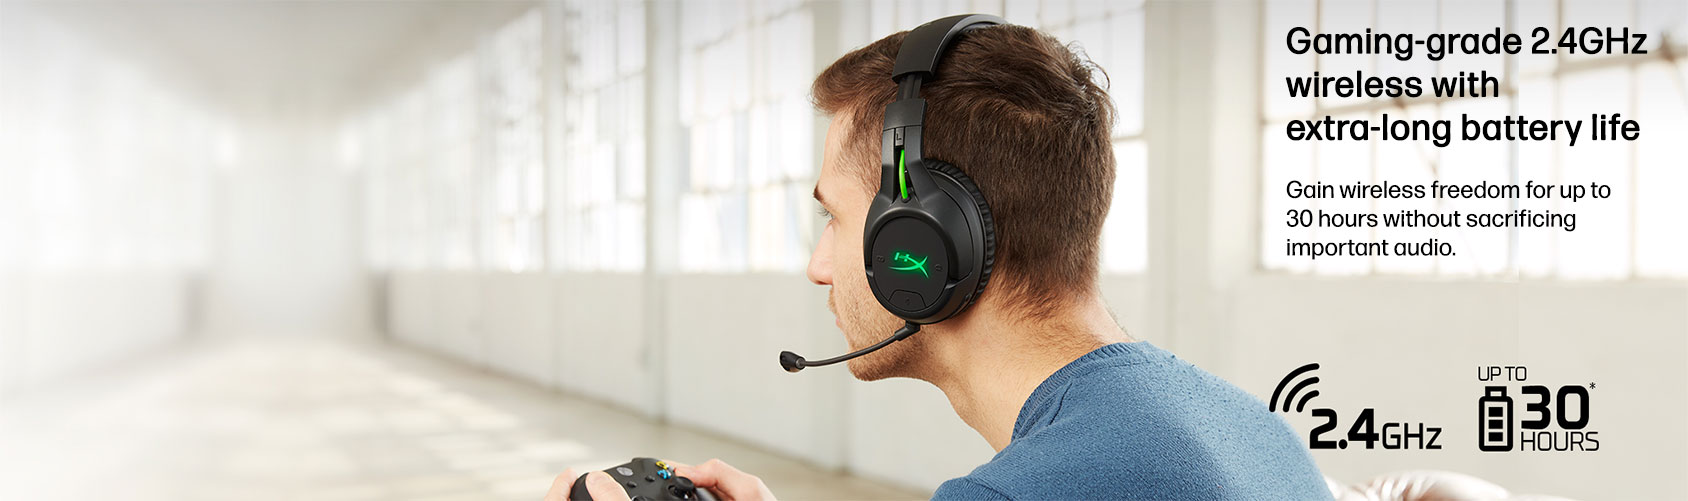 Gaming-grade 2.4GHz wireless with extra-long battery life